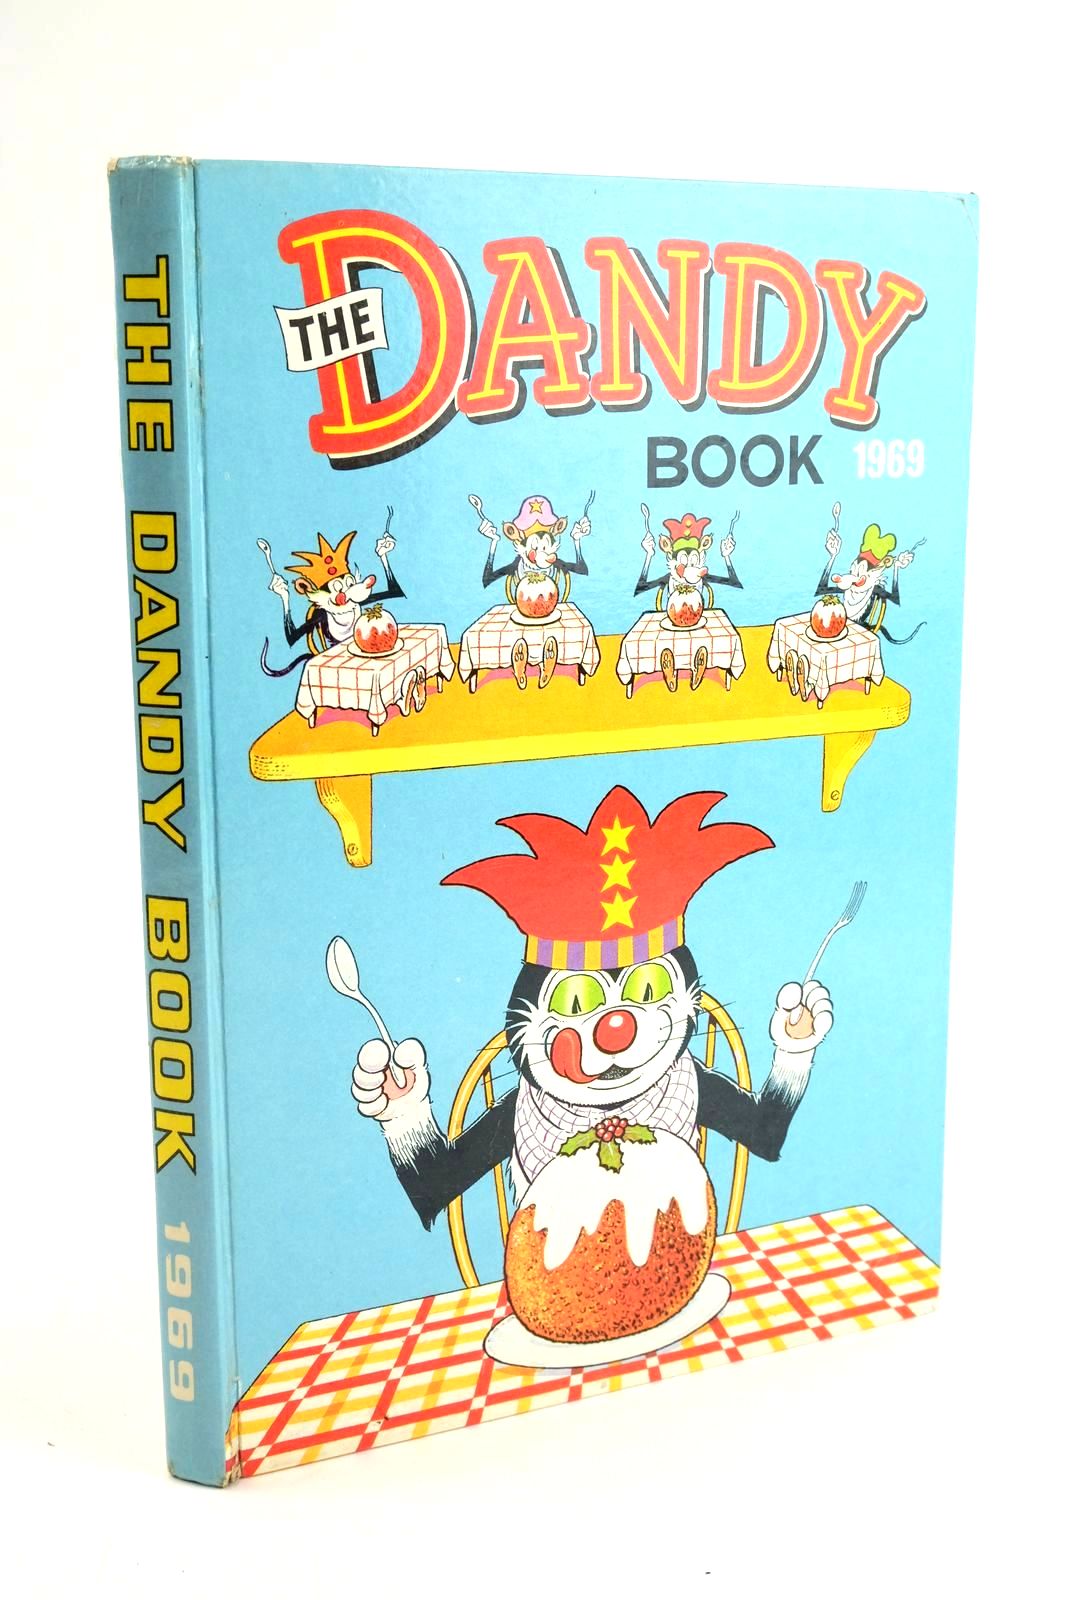 Photo of THE DANDY BOOK 1969 published by D.C. Thomson & Co Ltd. (STOCK CODE: 1323578)  for sale by Stella & Rose's Books